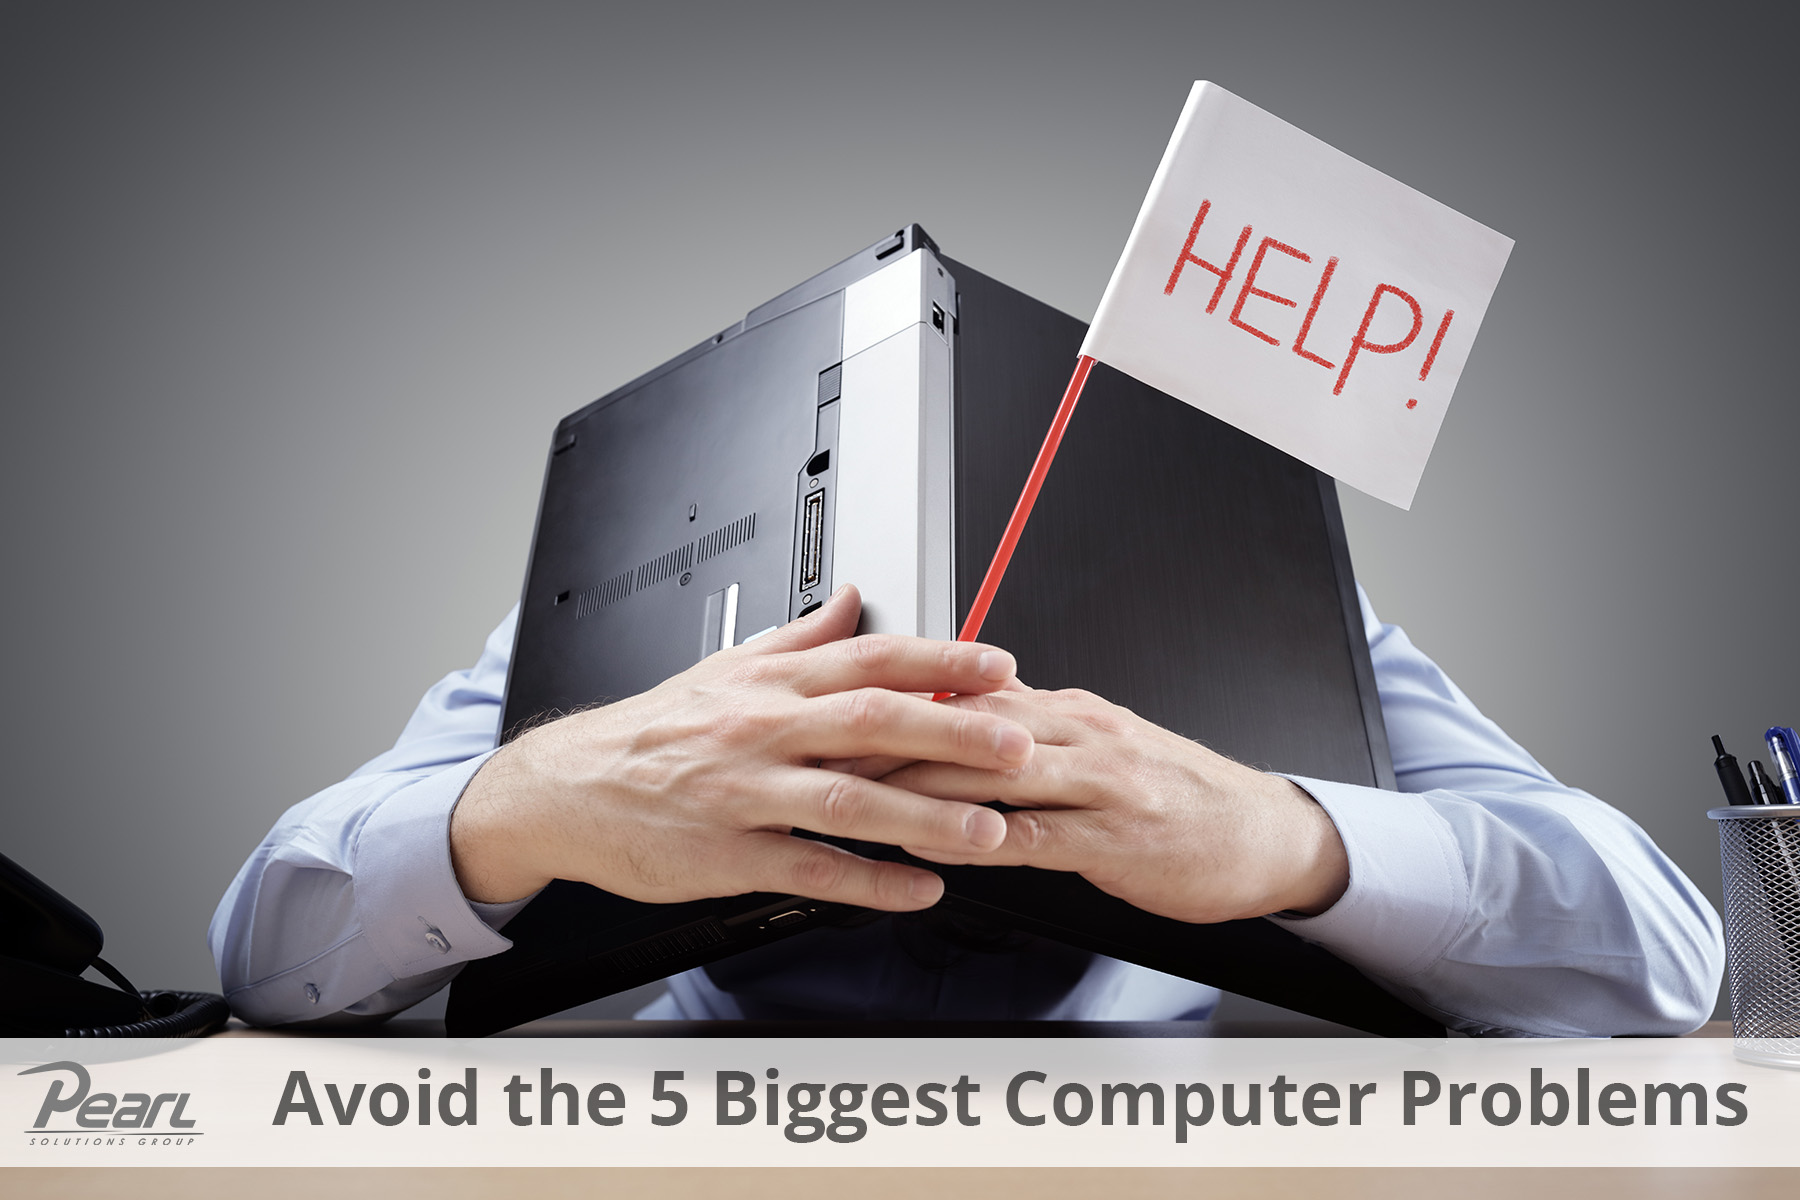 Avoid the 5 Biggest Computer Problems